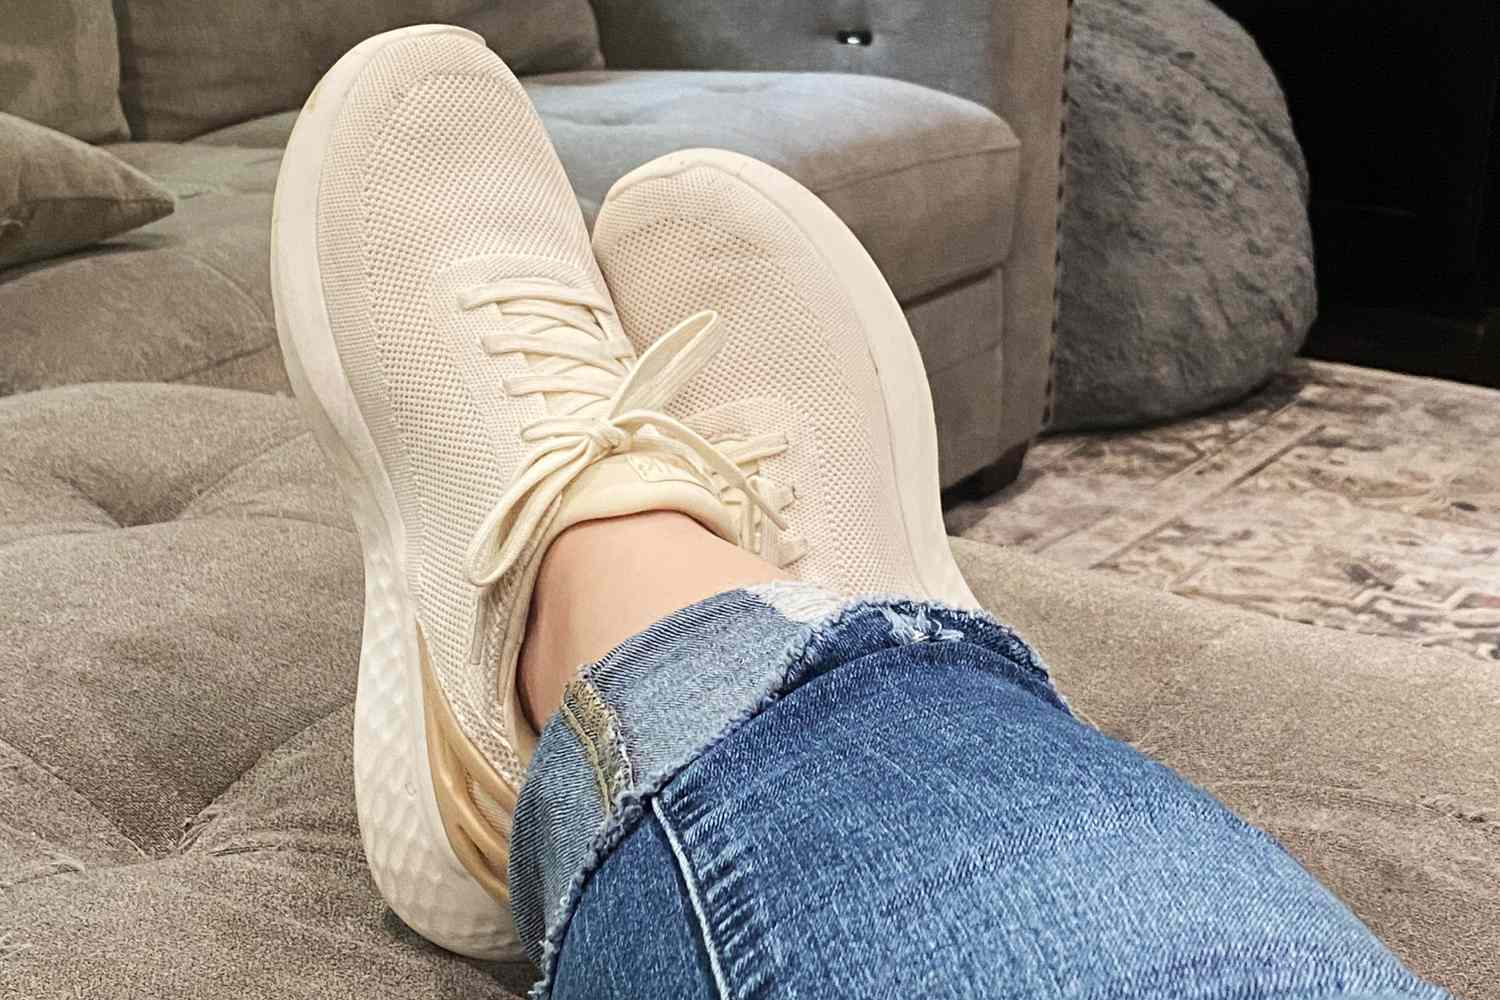 Kizik Women's Athens Sneakers being worn on a couch